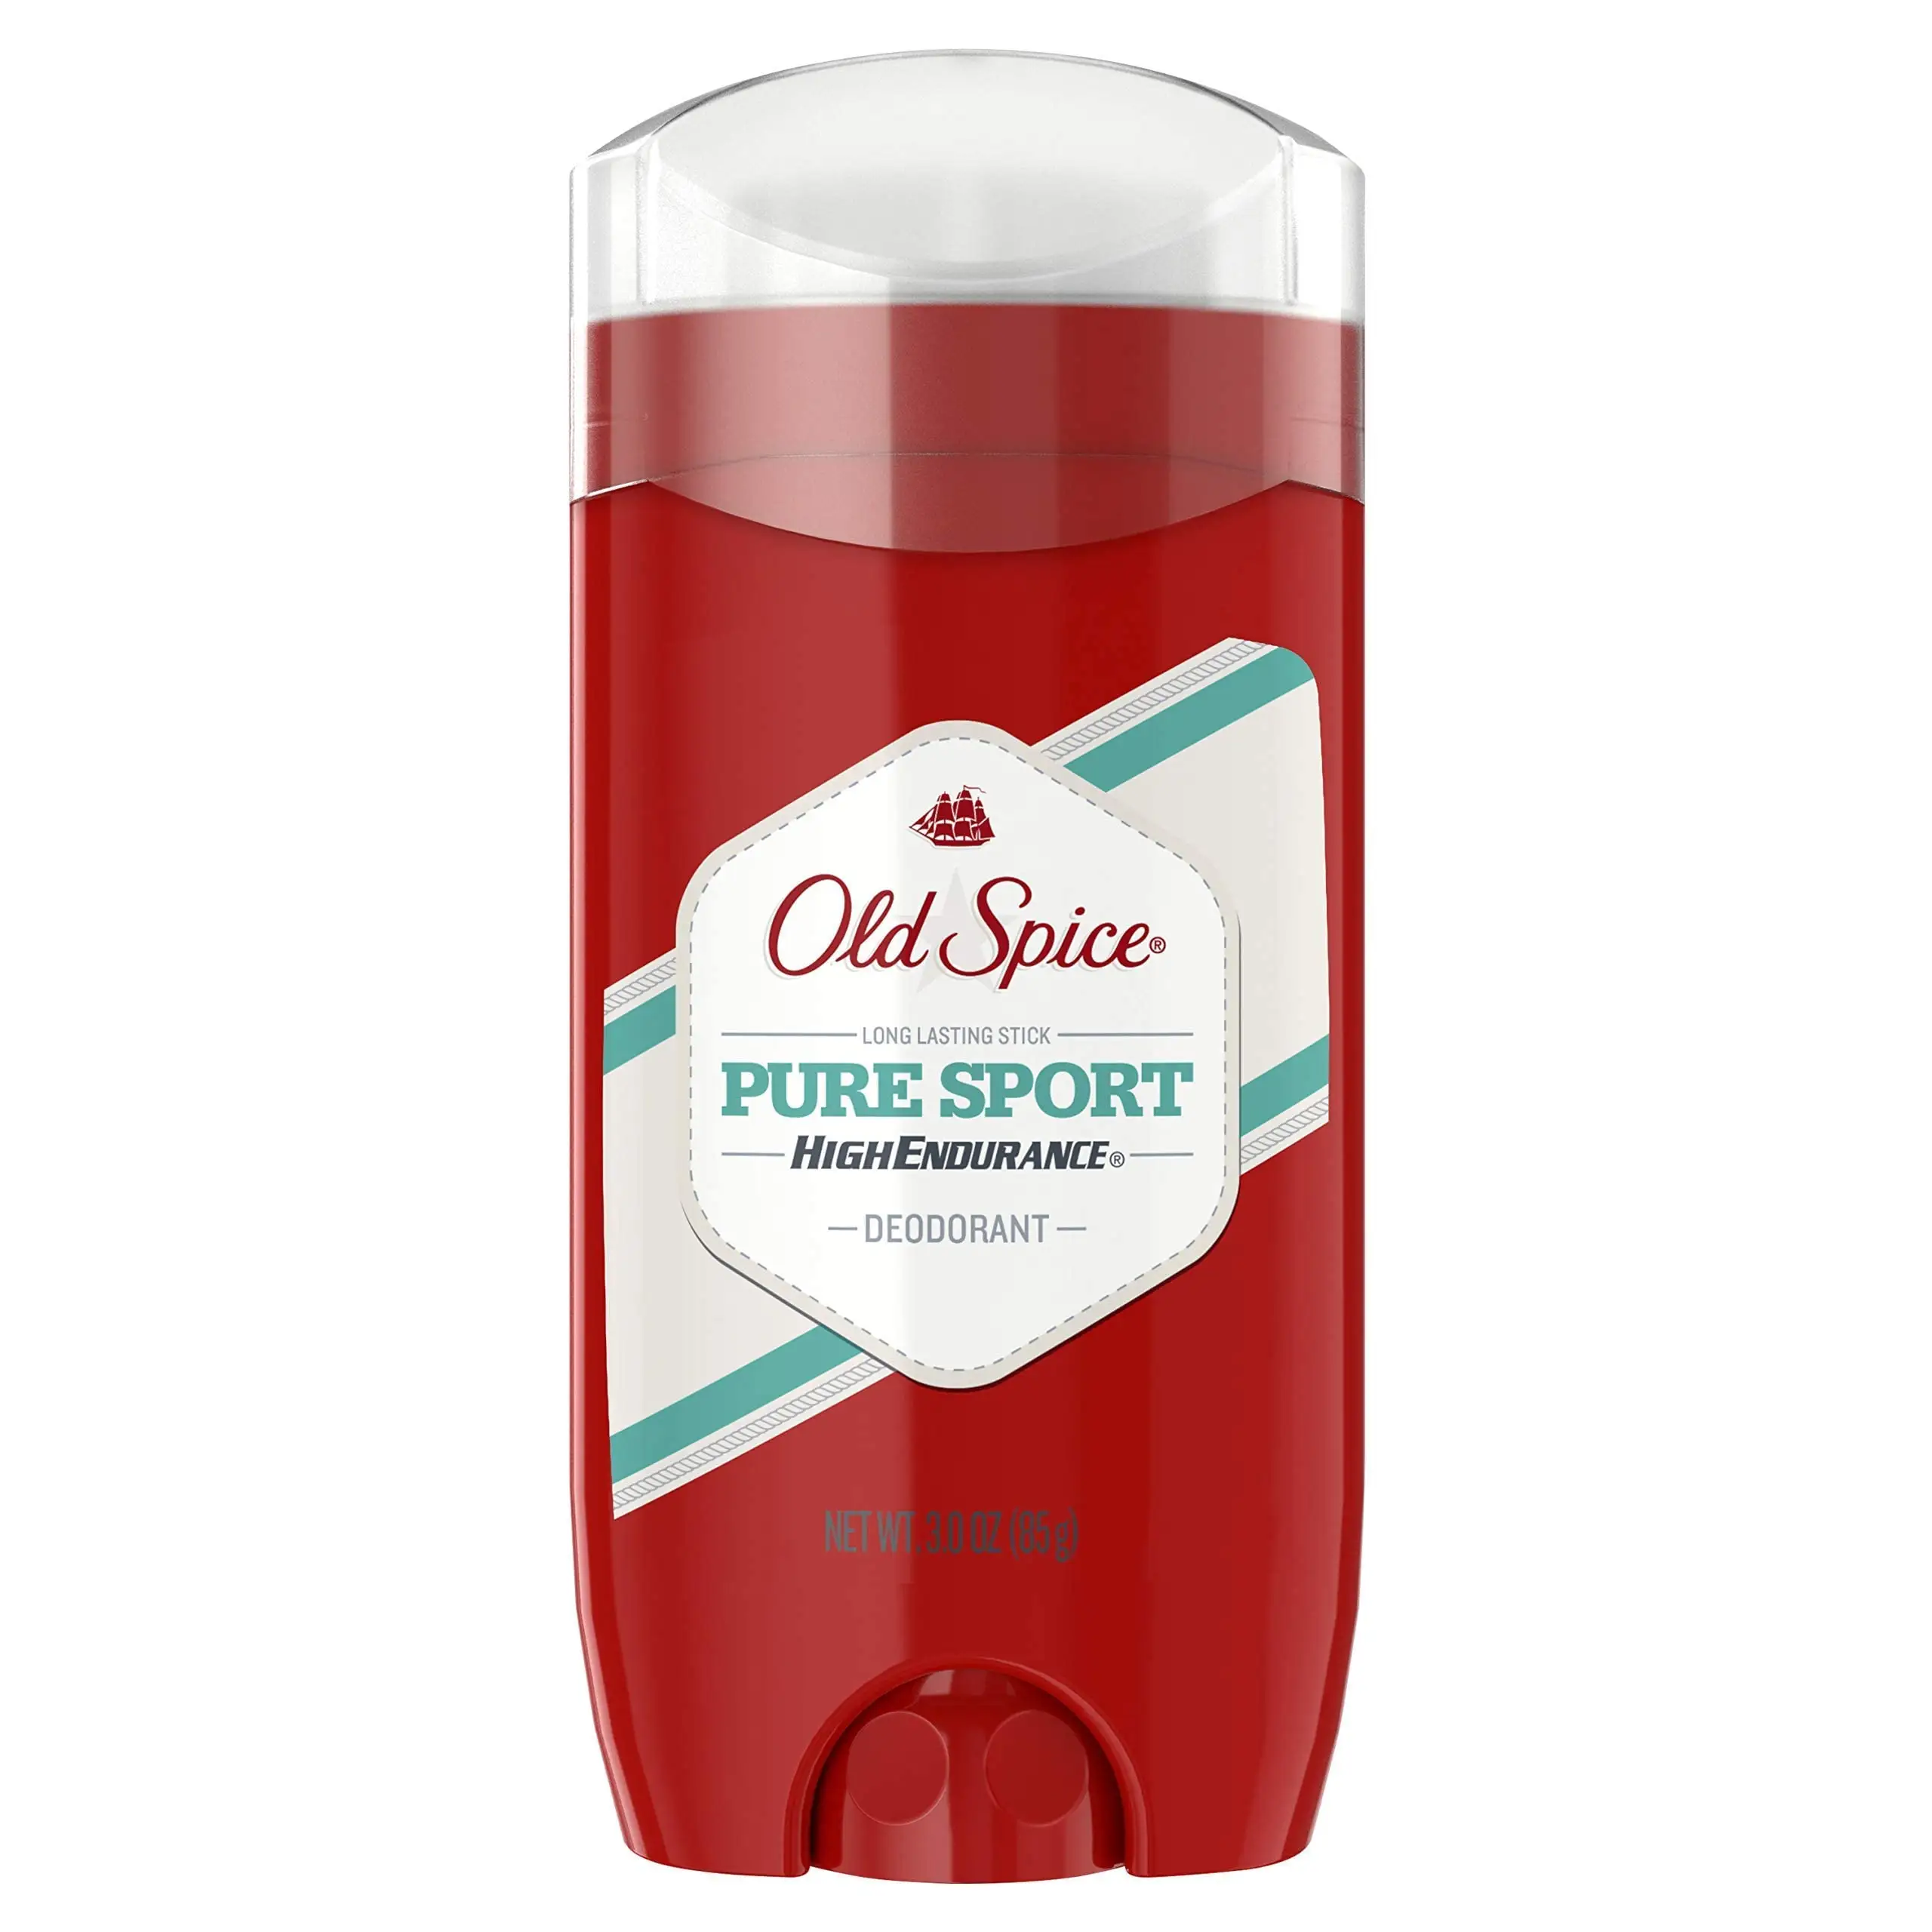 Old Spice Deodorant Wholesale, Pure Sport And Refresh Scent High Endurance 3 Ounce (Pack of 3) Best Price